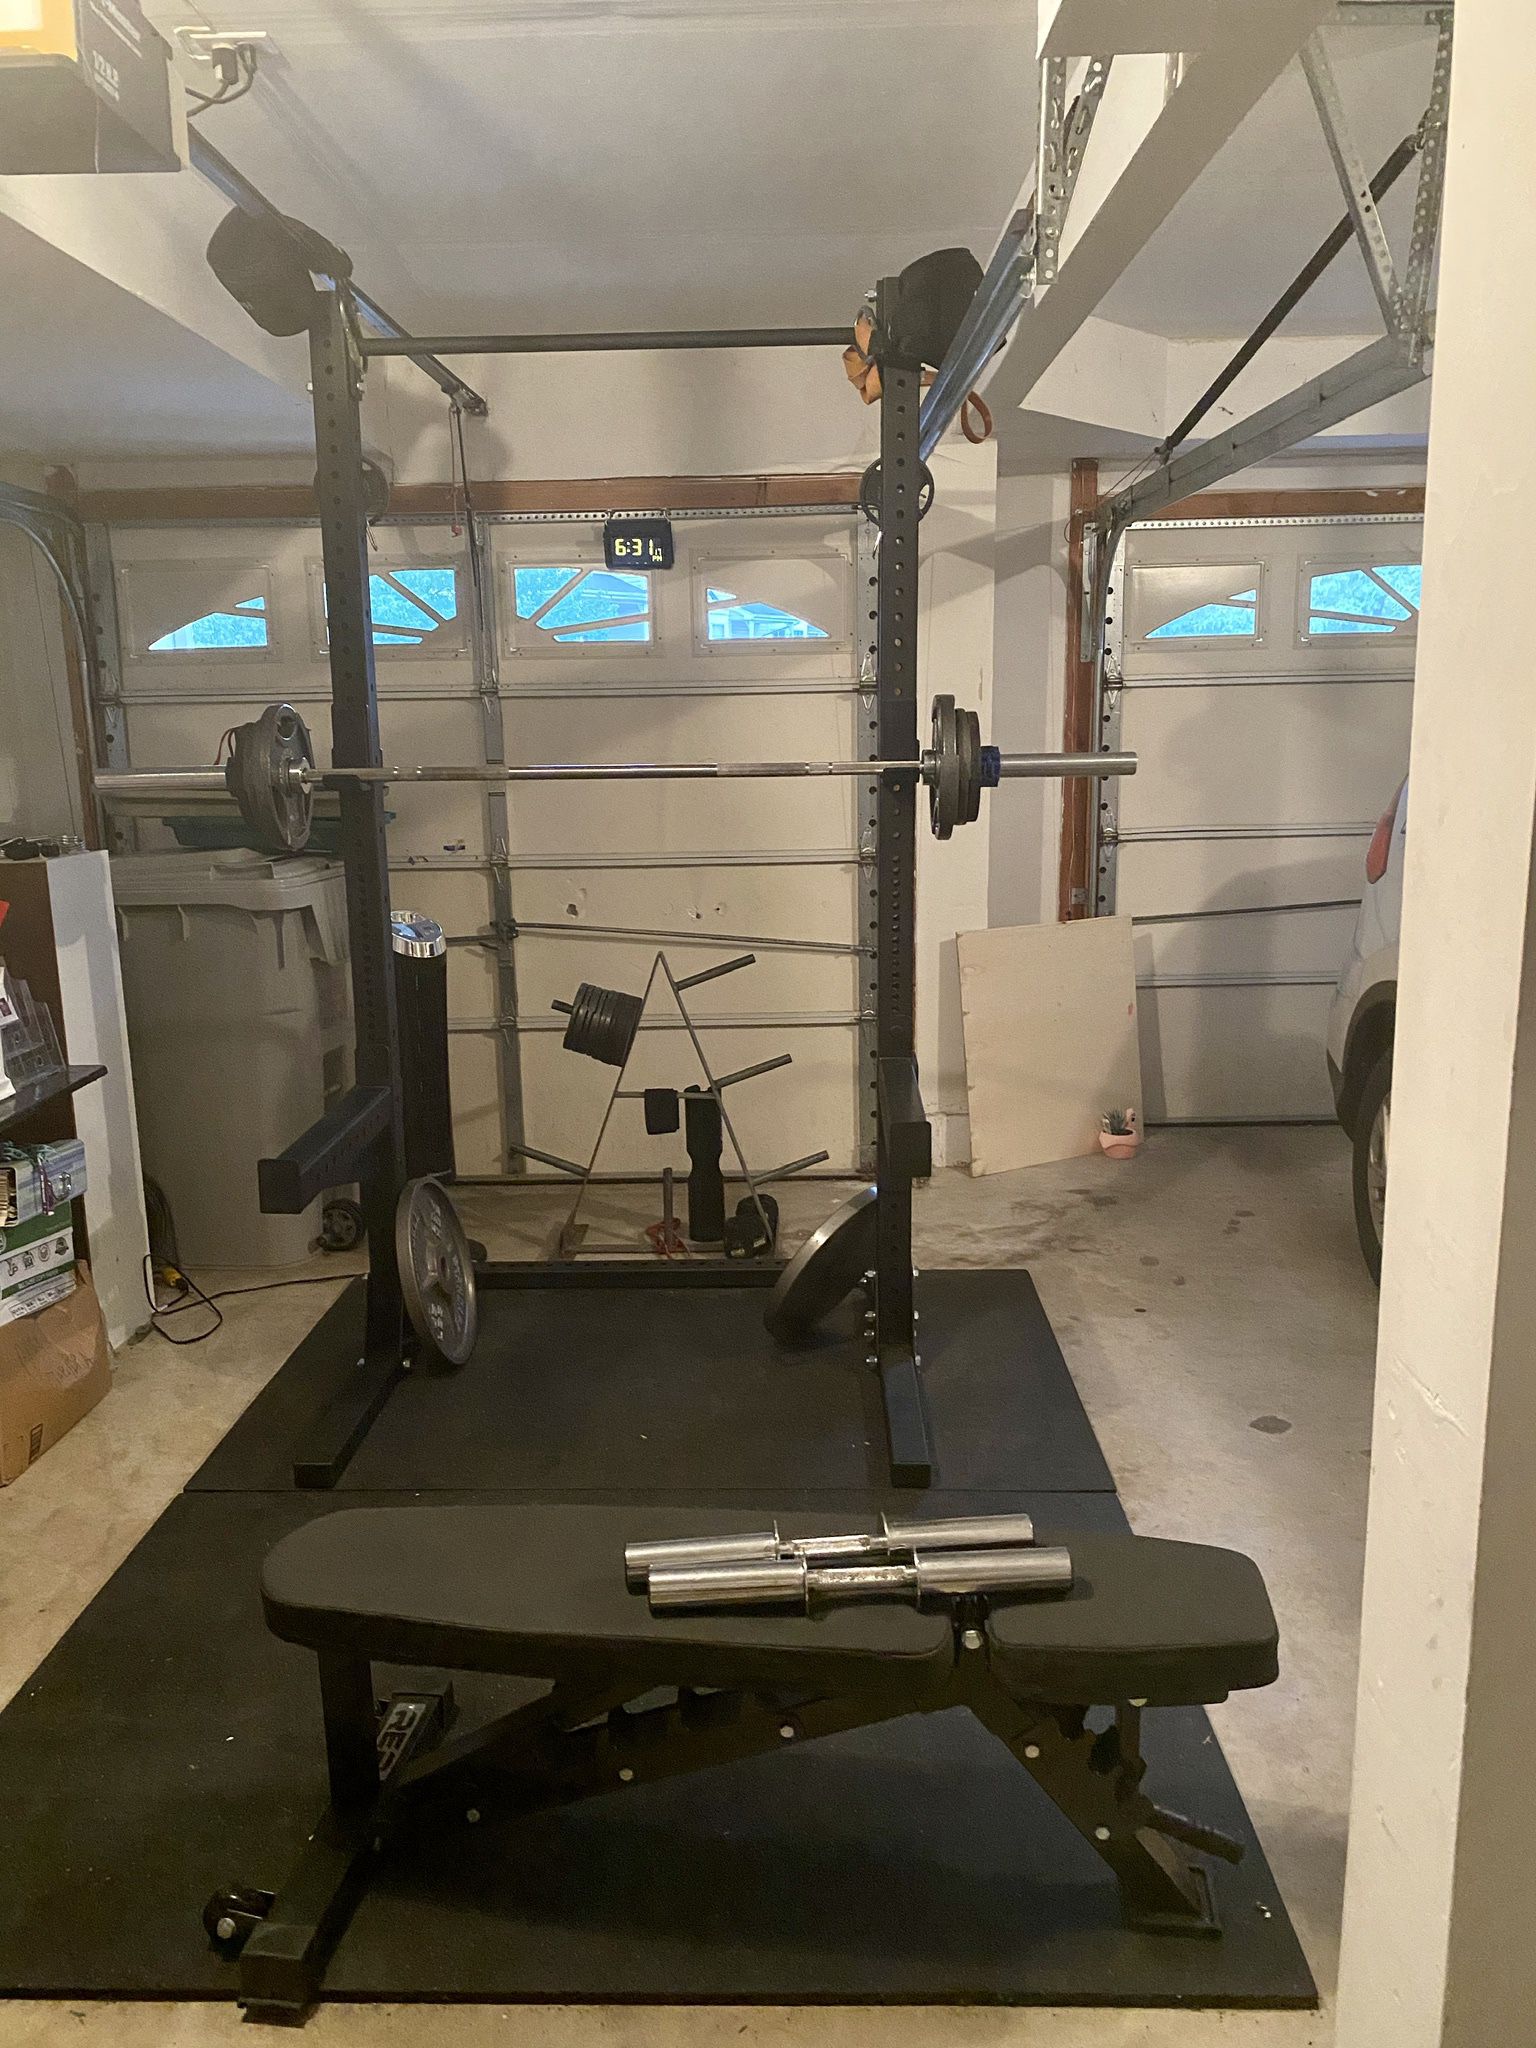 Full home Gym: Rogue Fitness And rep fitness Purchased New